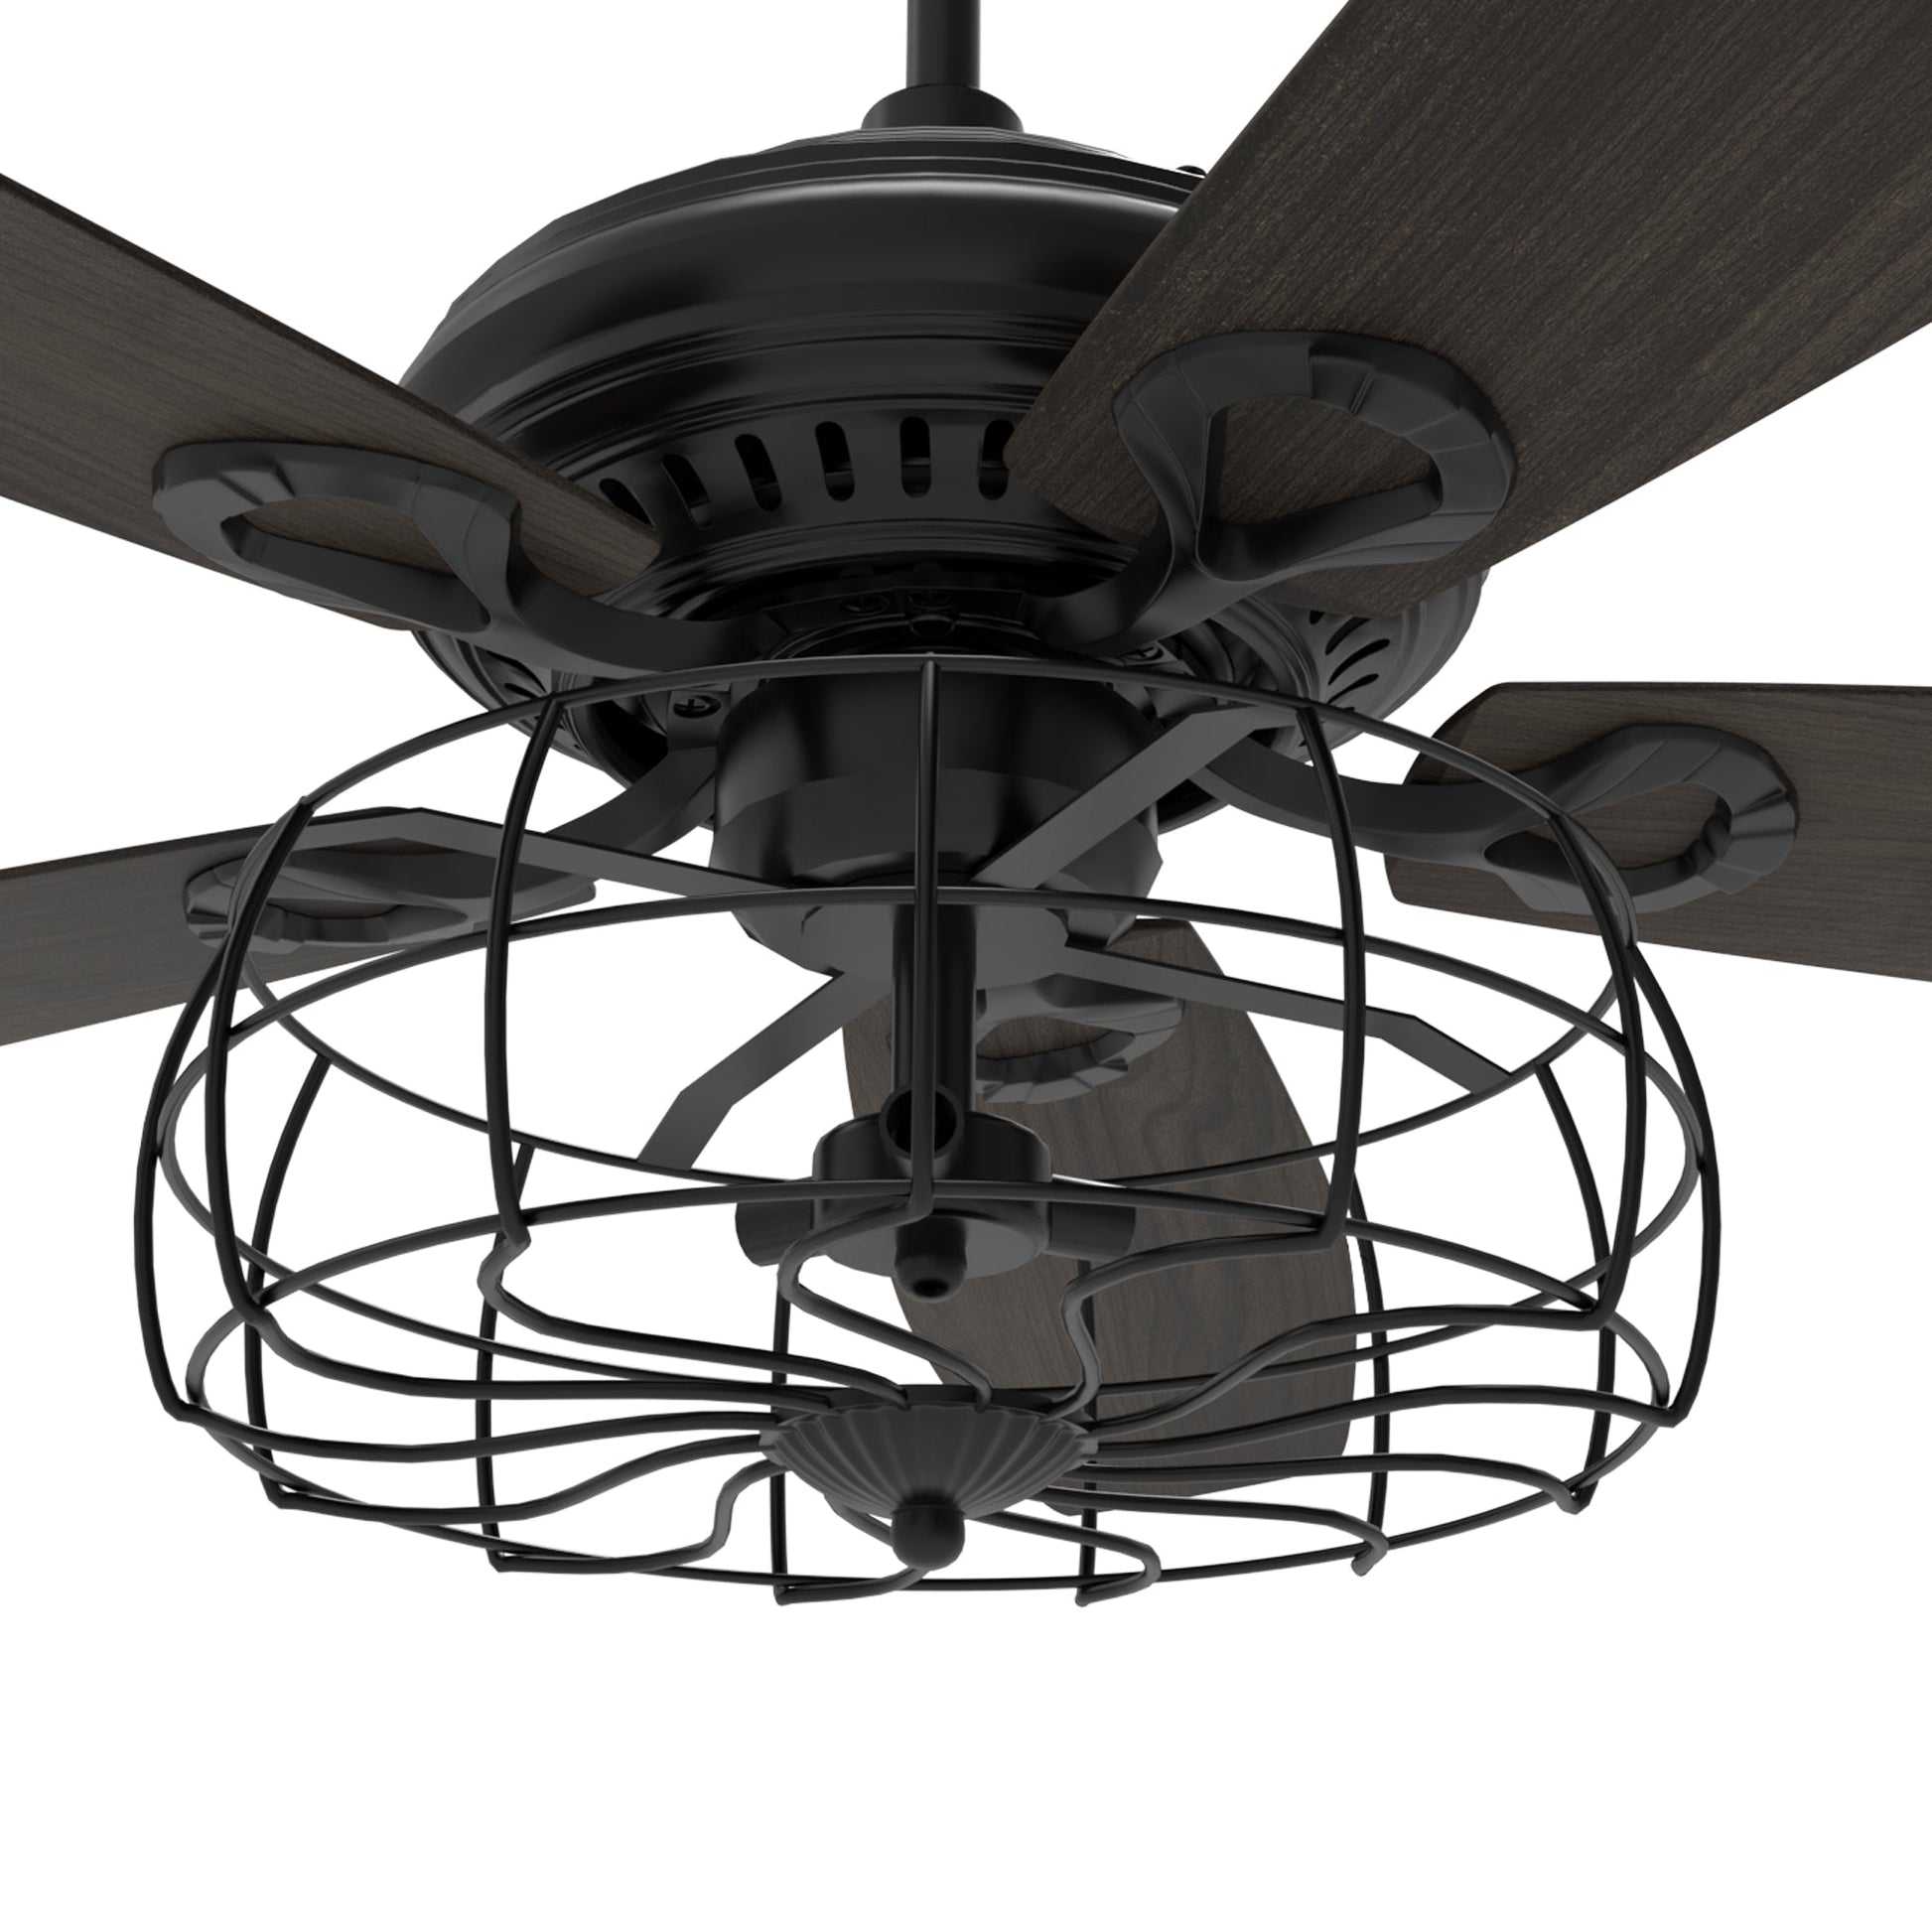 Huntley 52 Inch 5 Blade Vintage Best Ceiling Fan With Light Ledmyplace